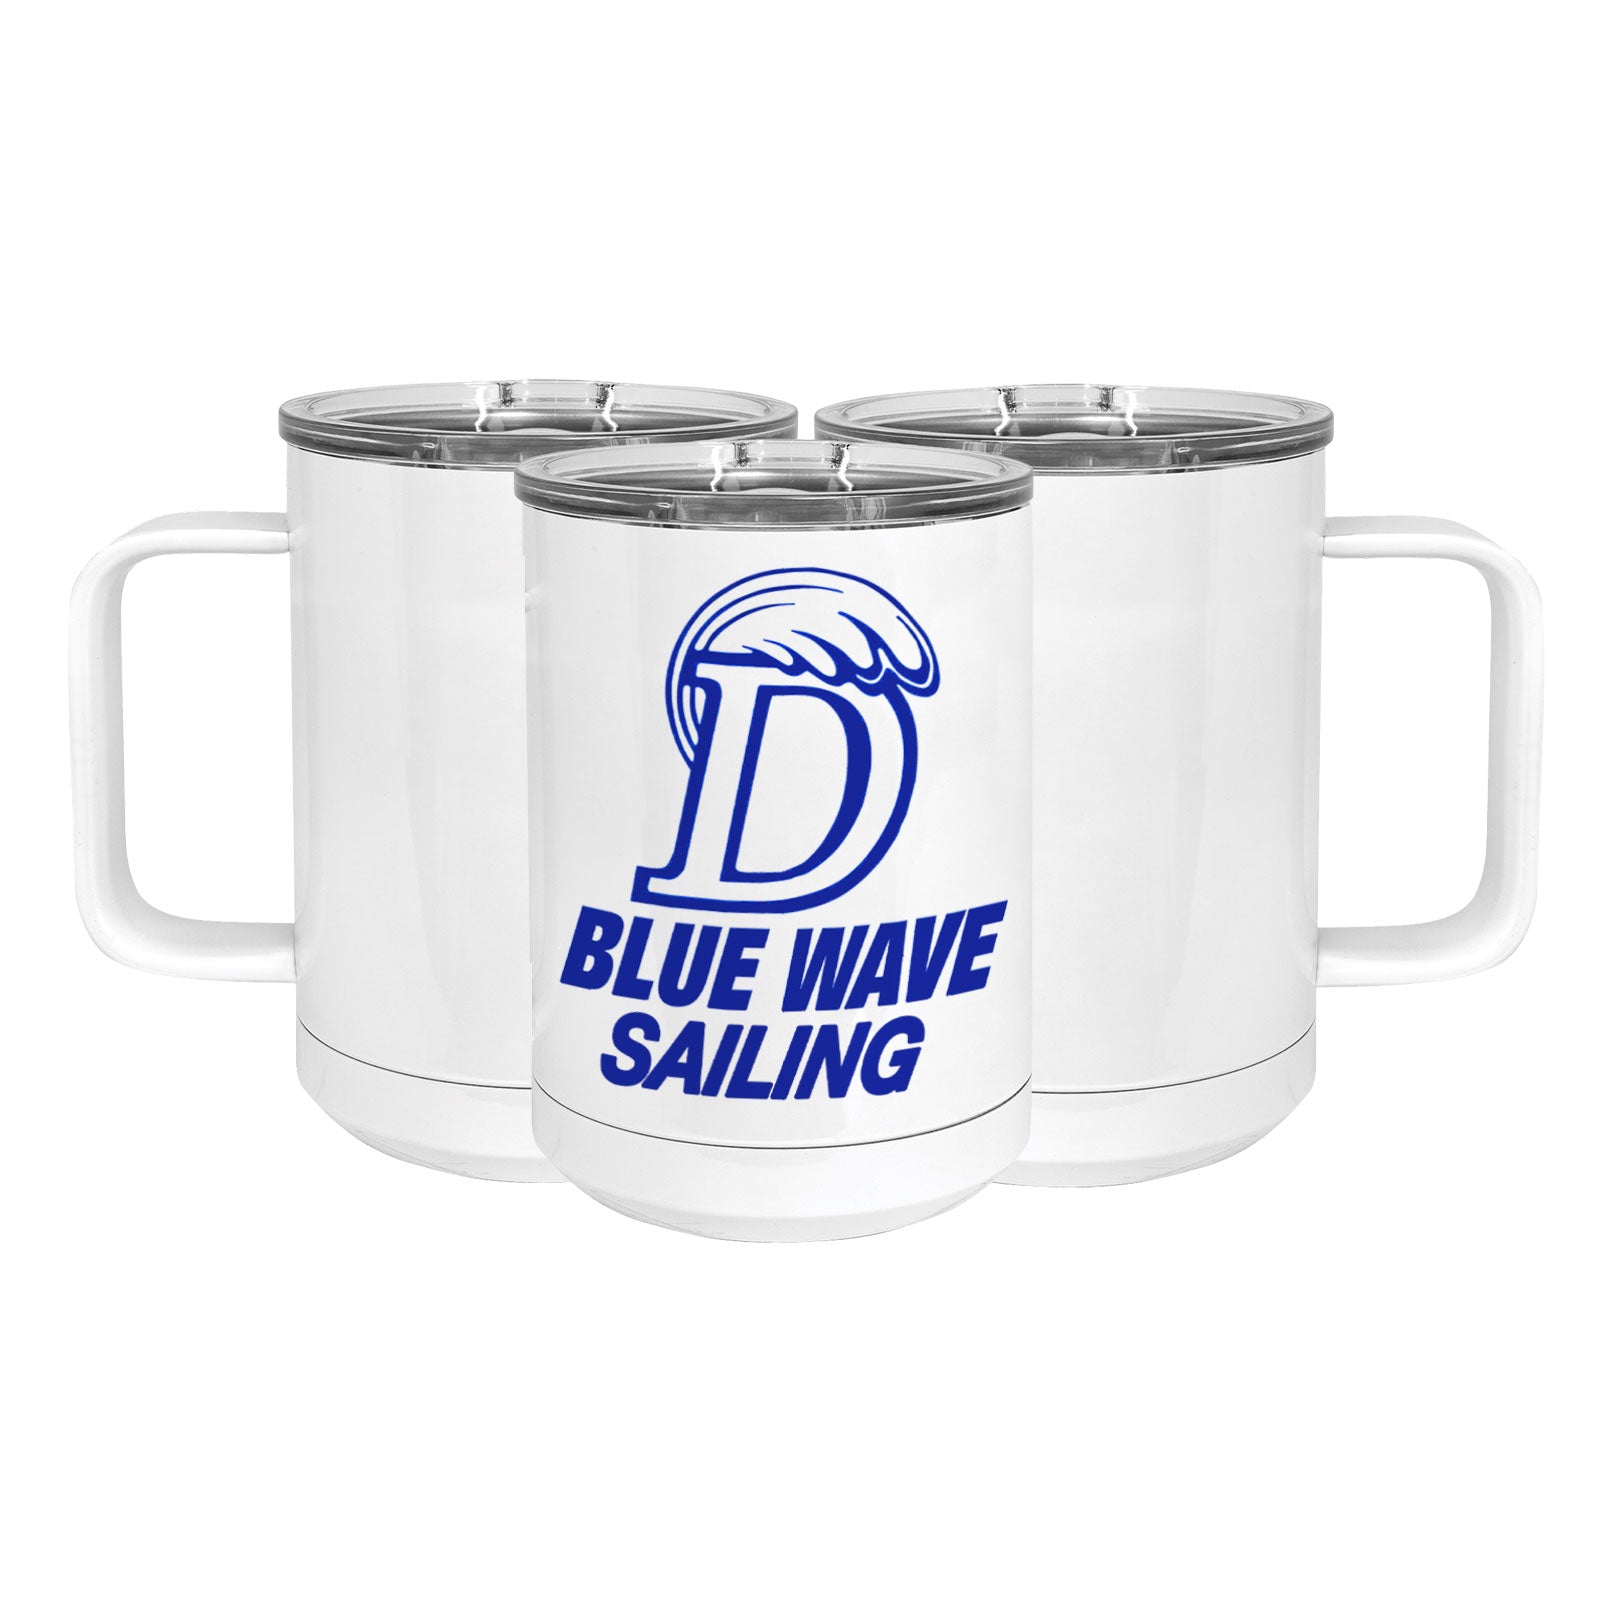 Blue Wave Sailing Stainless Steel Coffee Mug with Lid